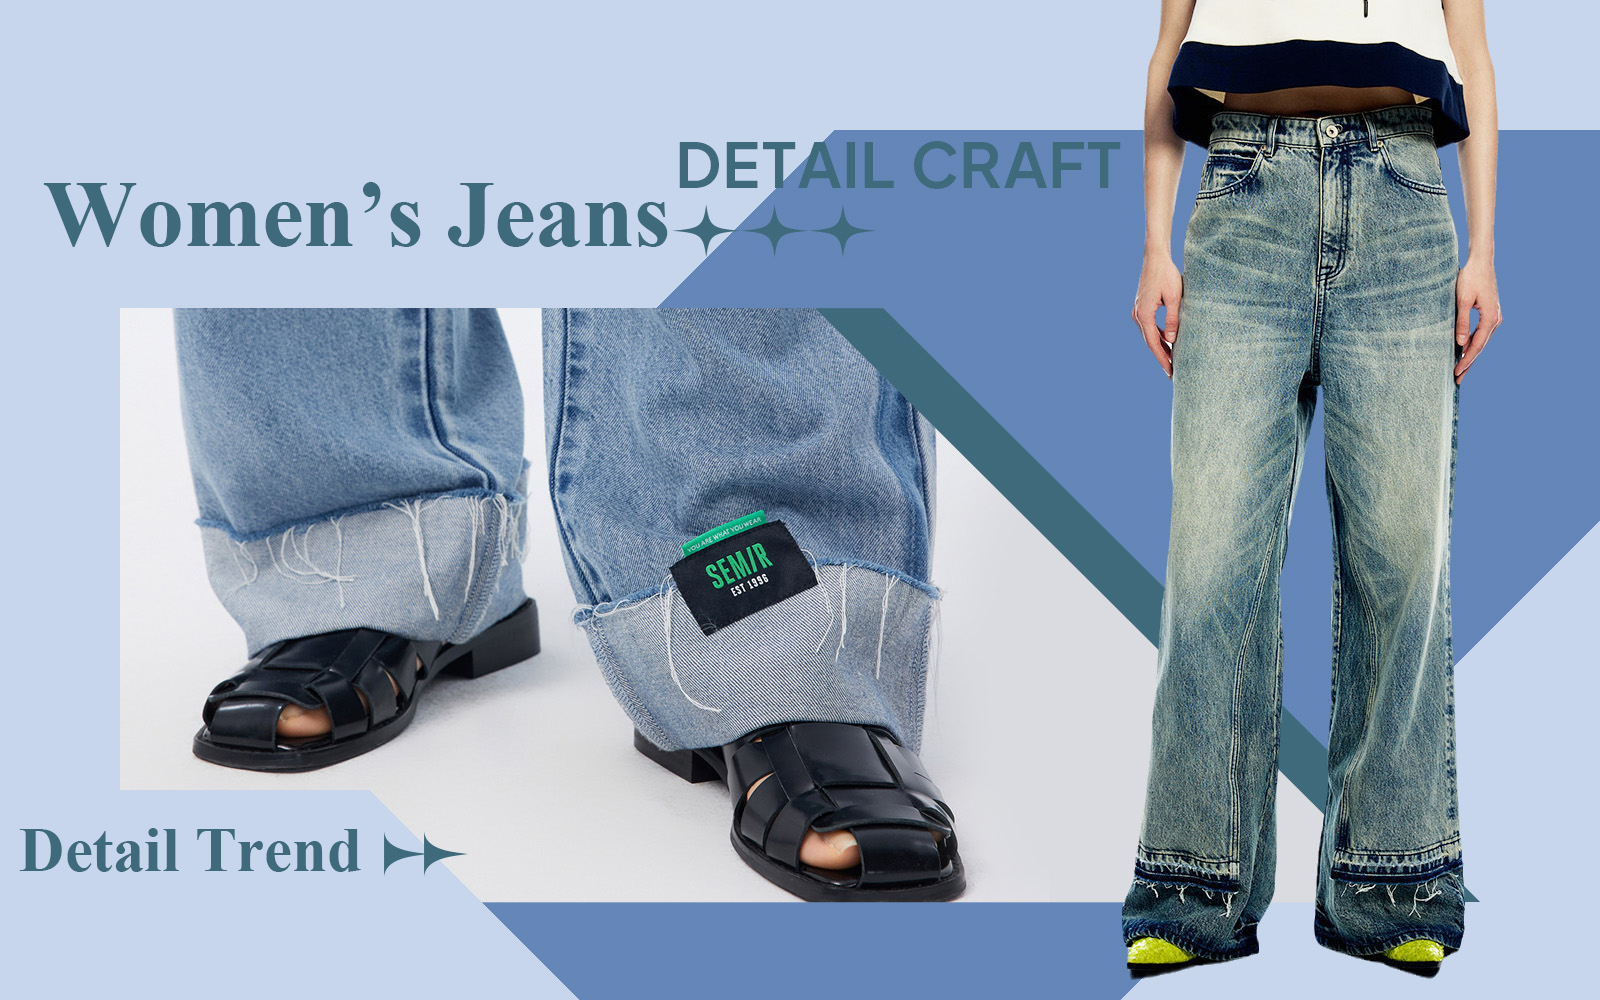 The Detail & Craft Trend for Women's Jeans